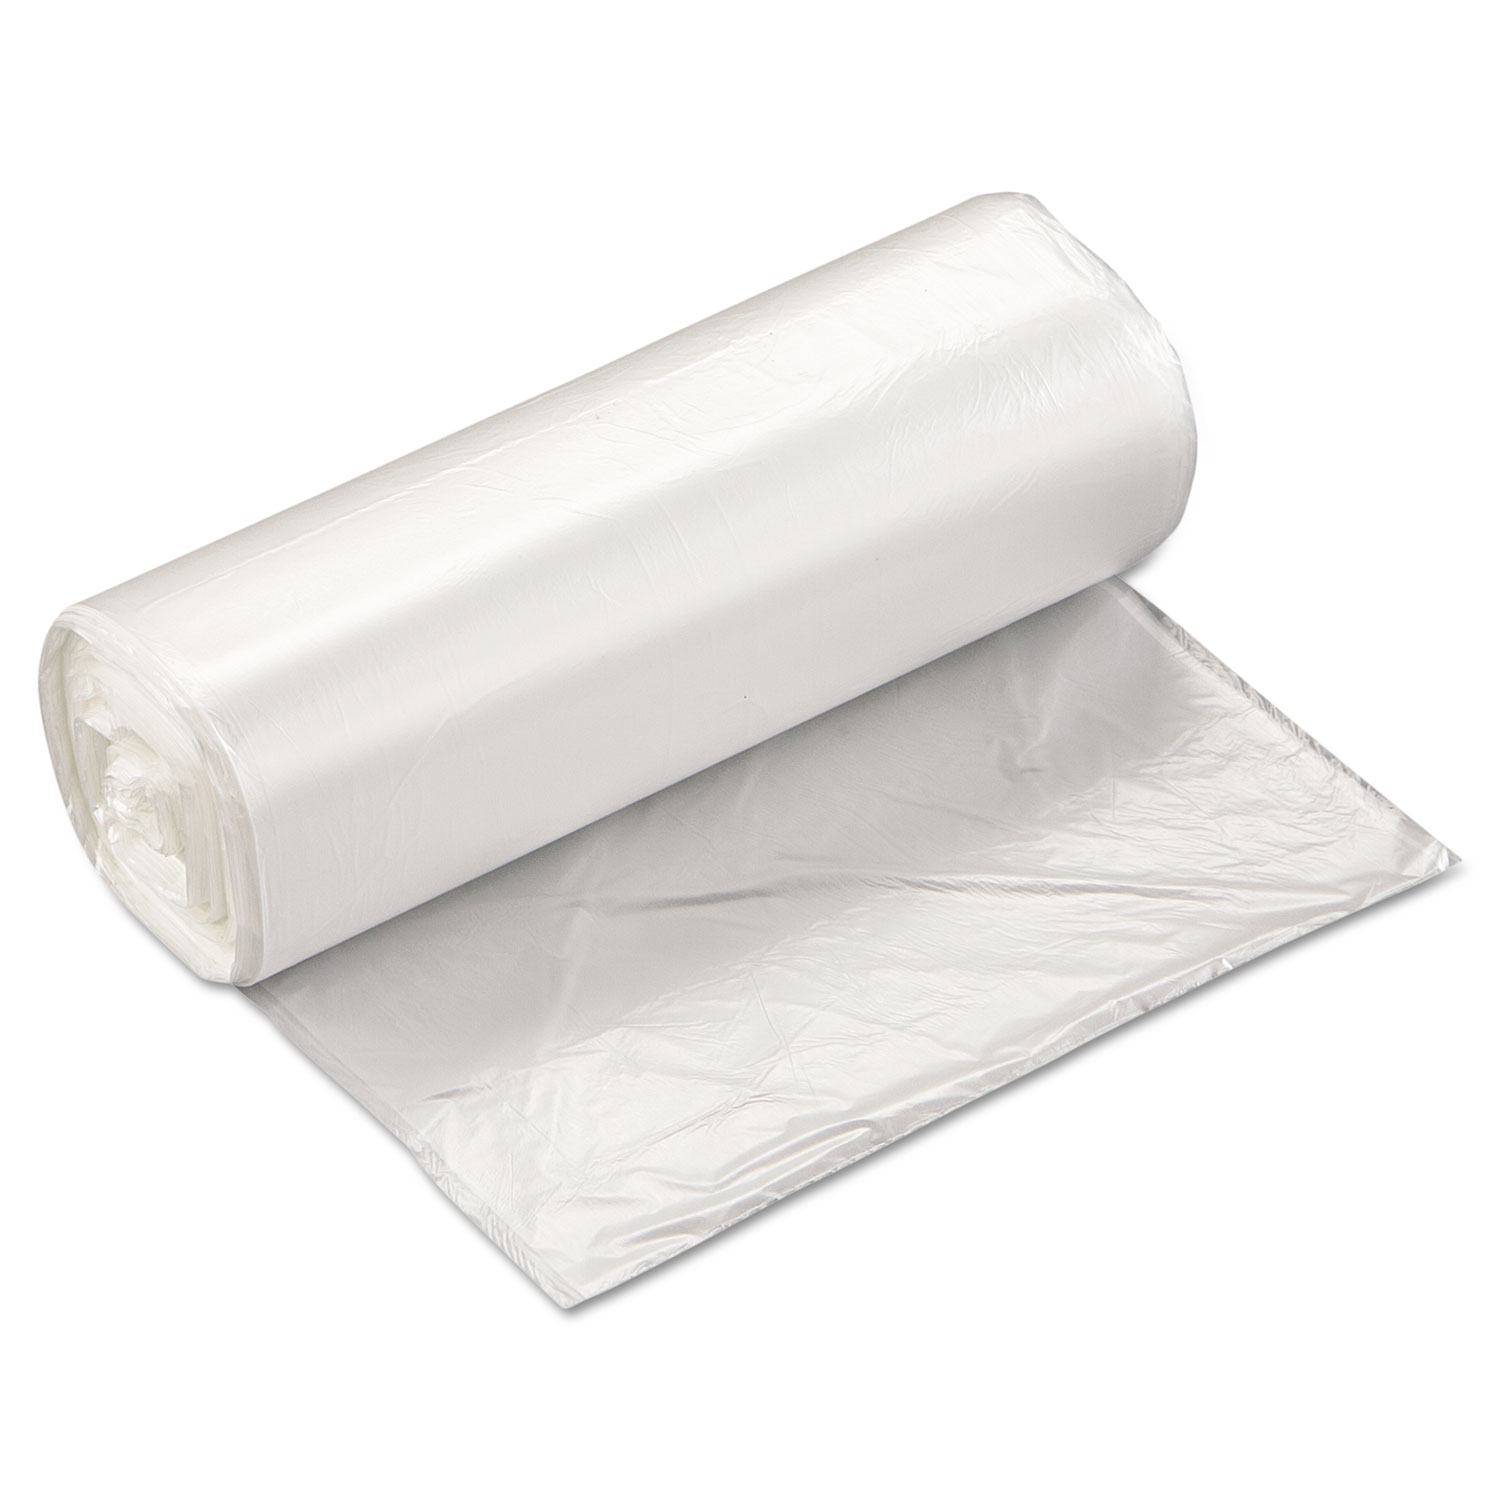  Inteplast Group EC2433N High-Density Commercial Can Liners, 16 gal, 5 microns, 24 x 33, Natural, 1,000/Carton (IBSEC2433N) 